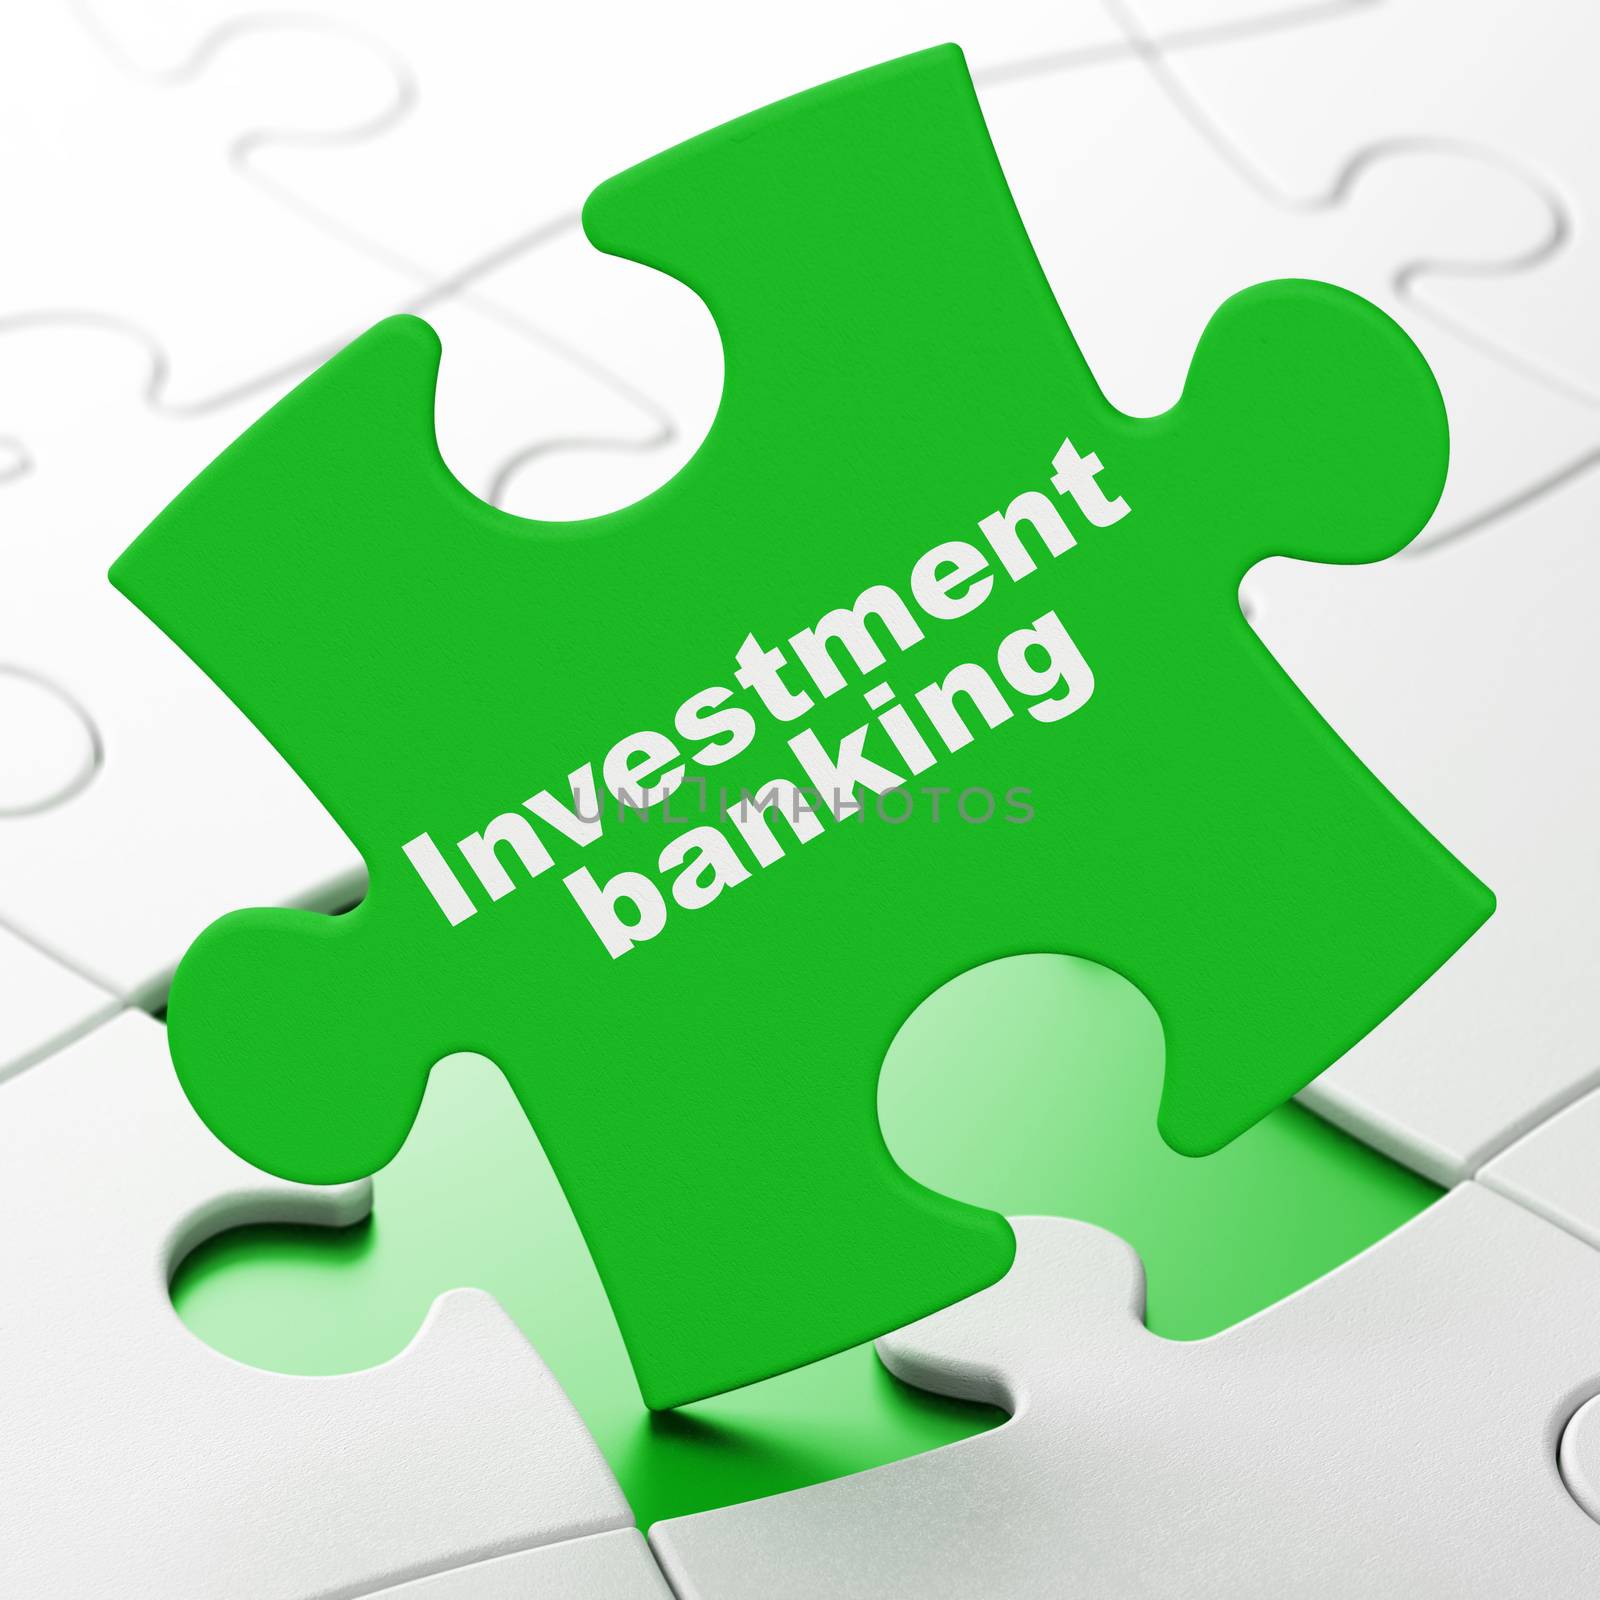 Money concept: Investment Banking on Green puzzle pieces background, 3D rendering